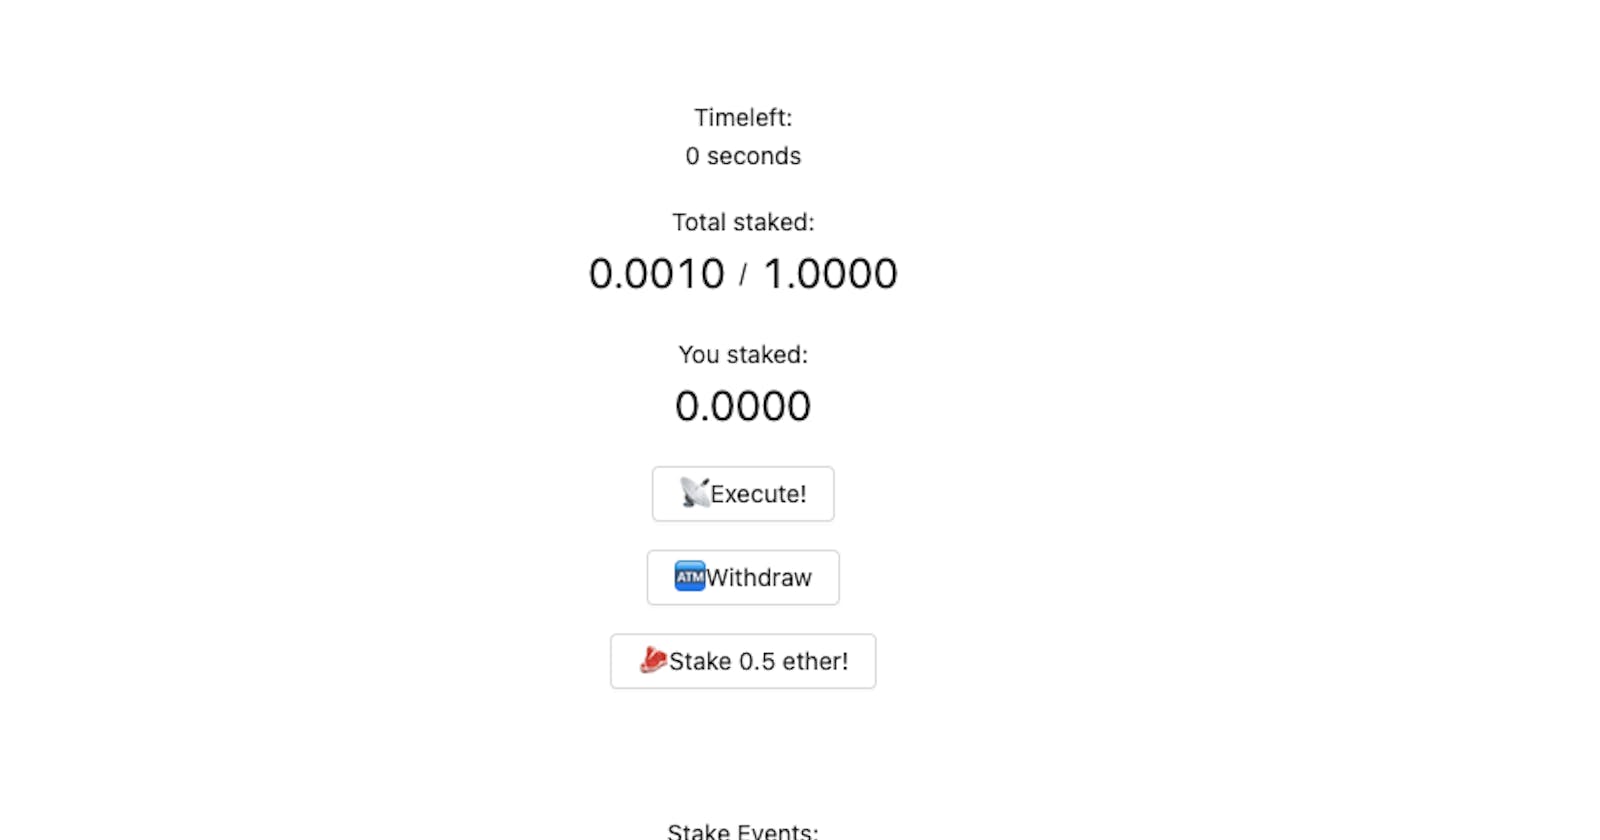 How I Implemented Speed Run Ethereum Challenge 1: Decentralized Staking App